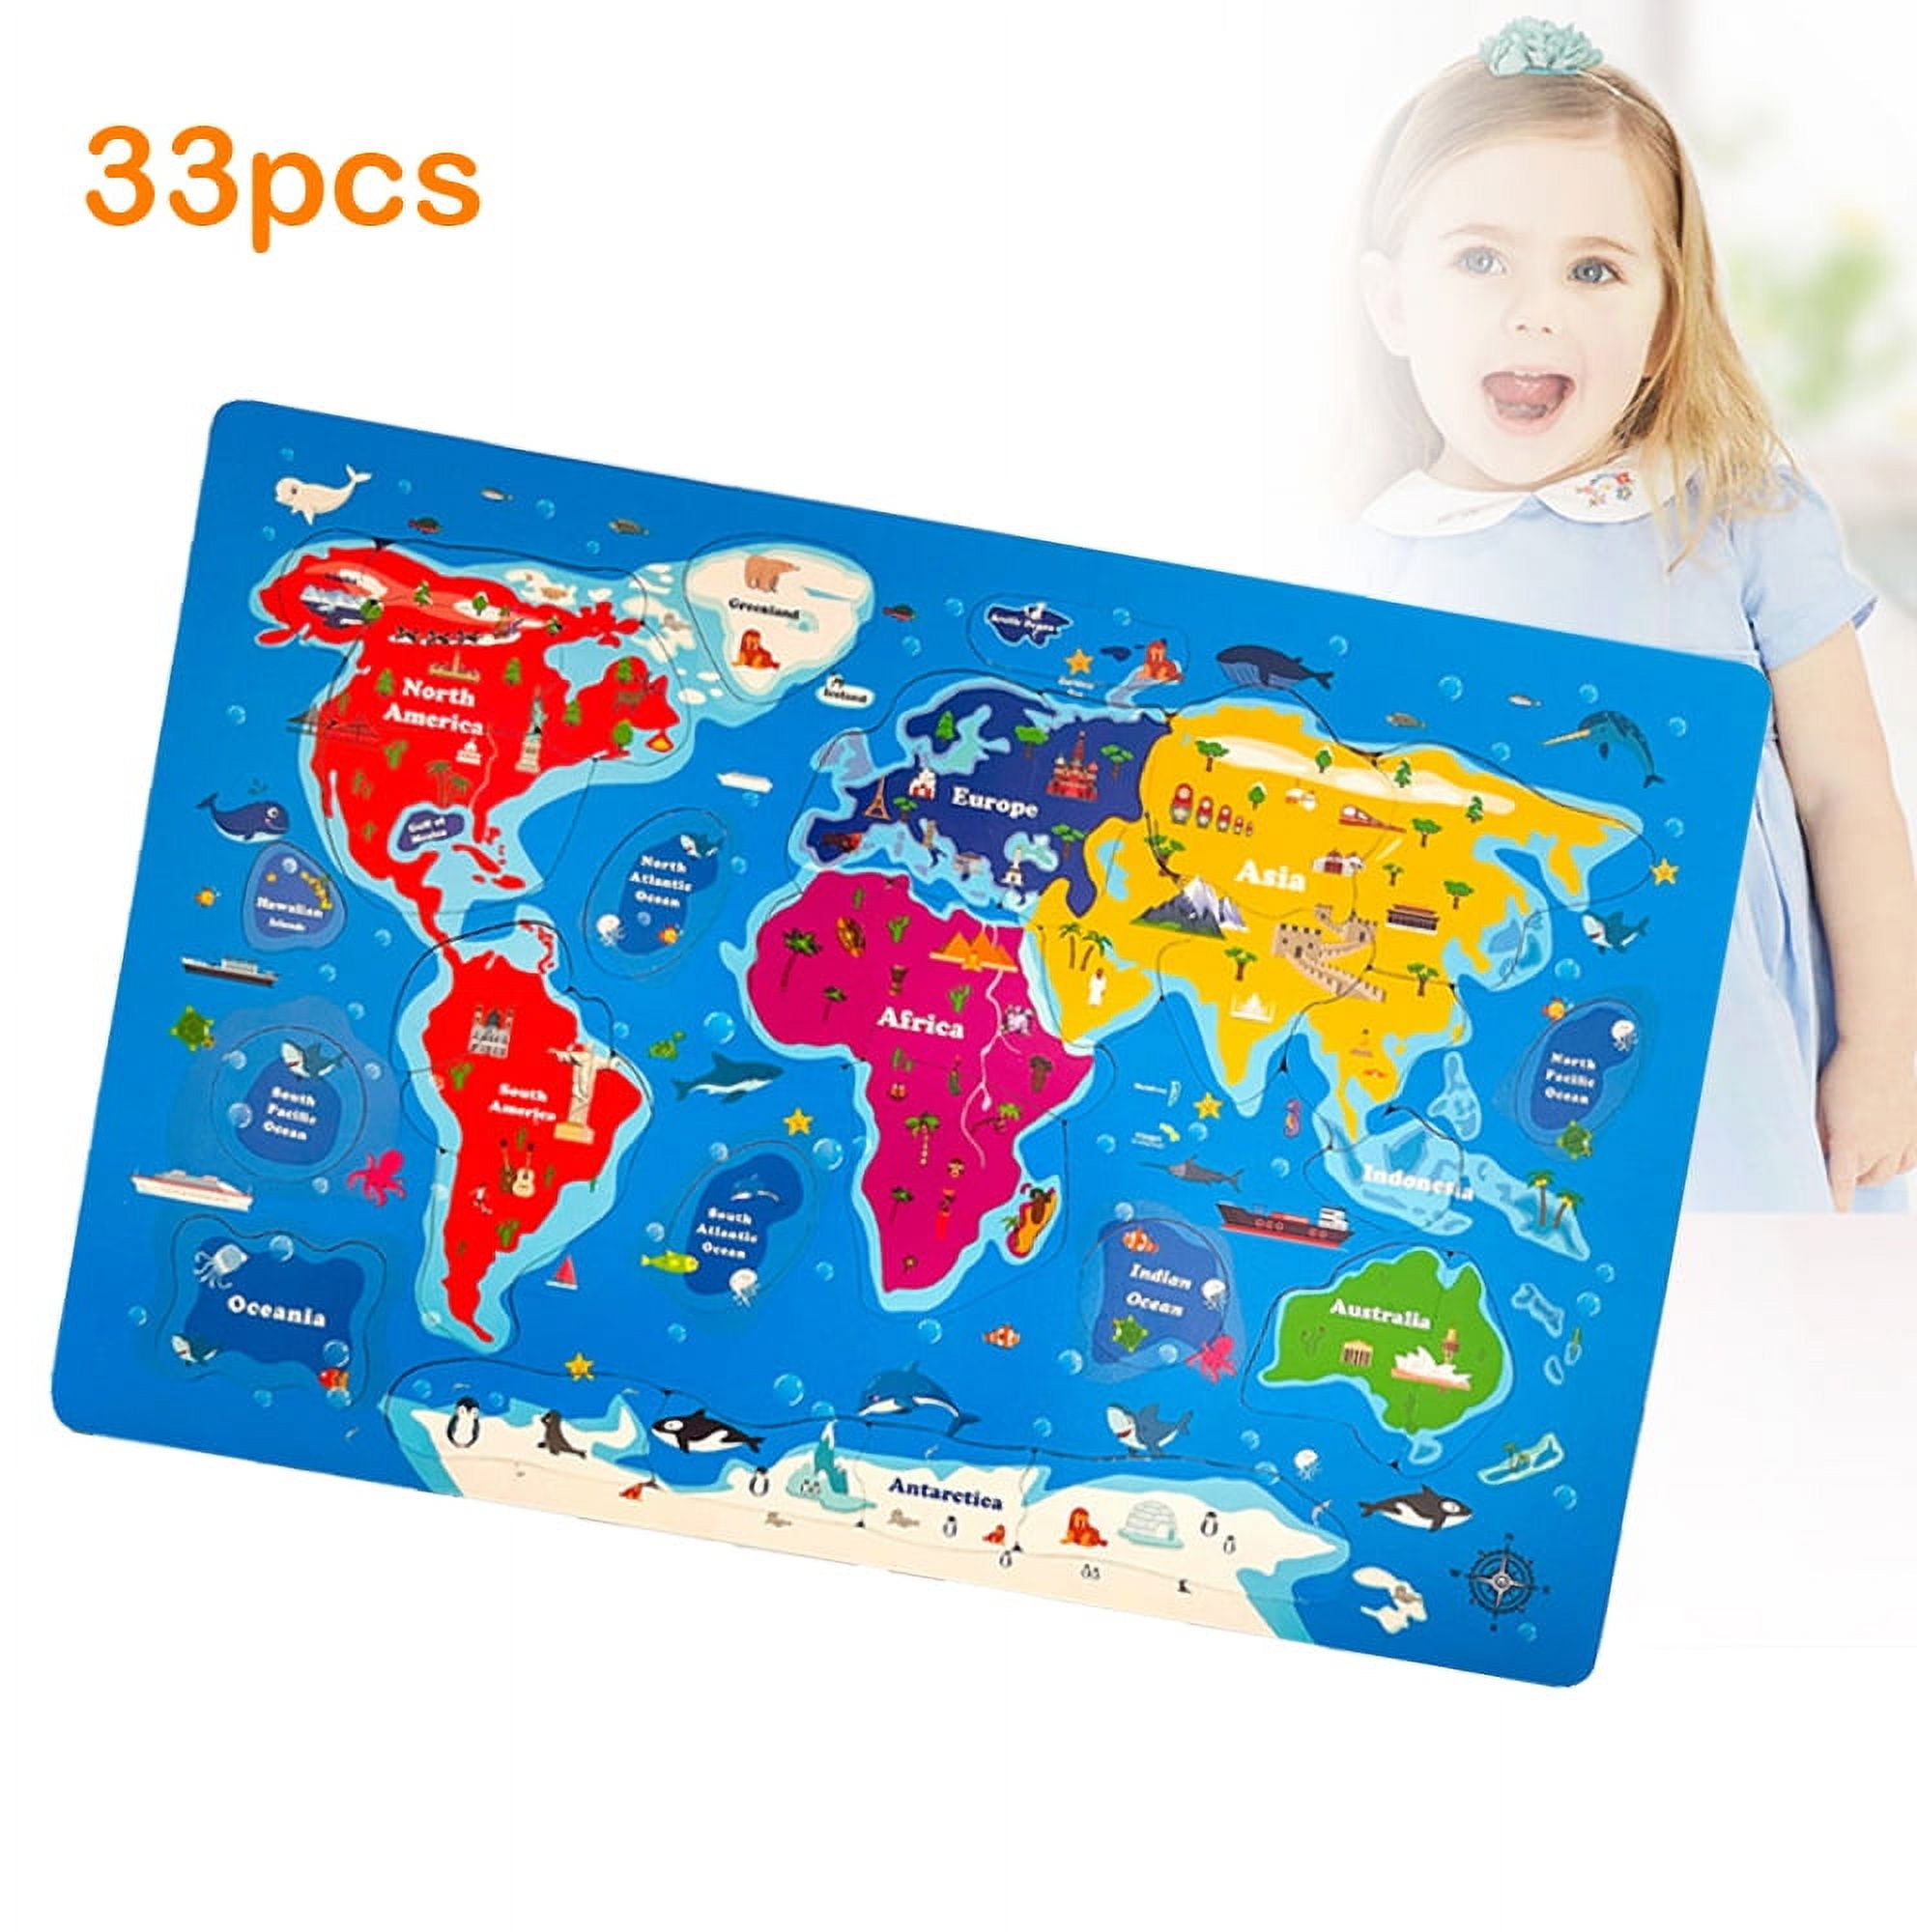 Wooden Jigsaw Puzzles Set for Kids Age 3-5 Year Old 33 Piece